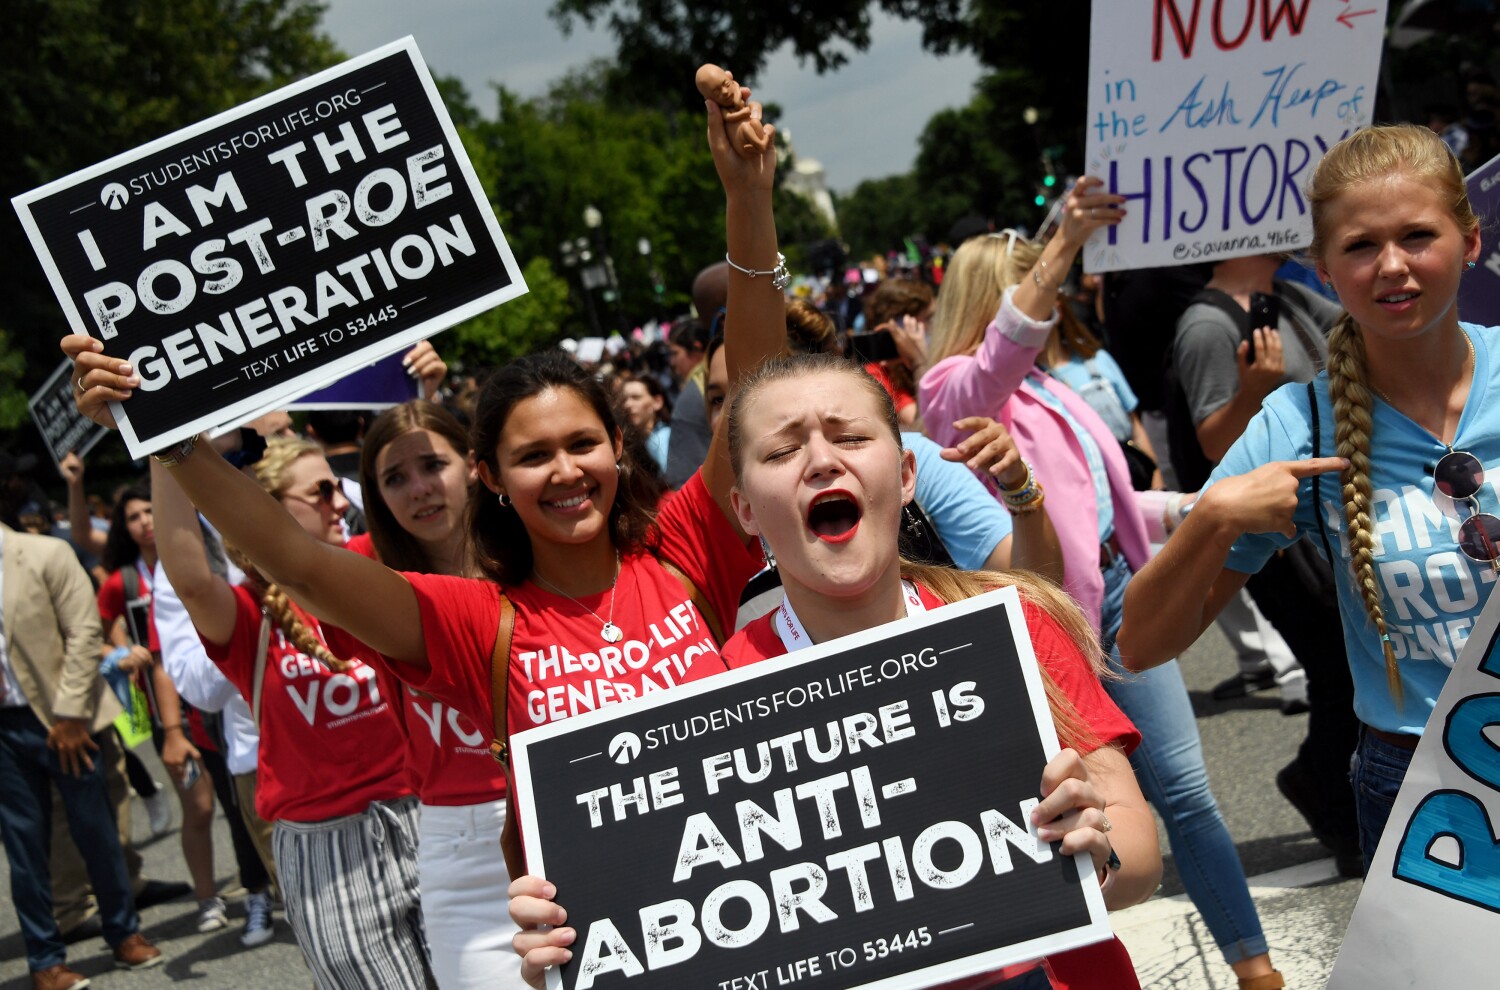 With Roe dead, anti-abortion religious groups insist they want to help mothers